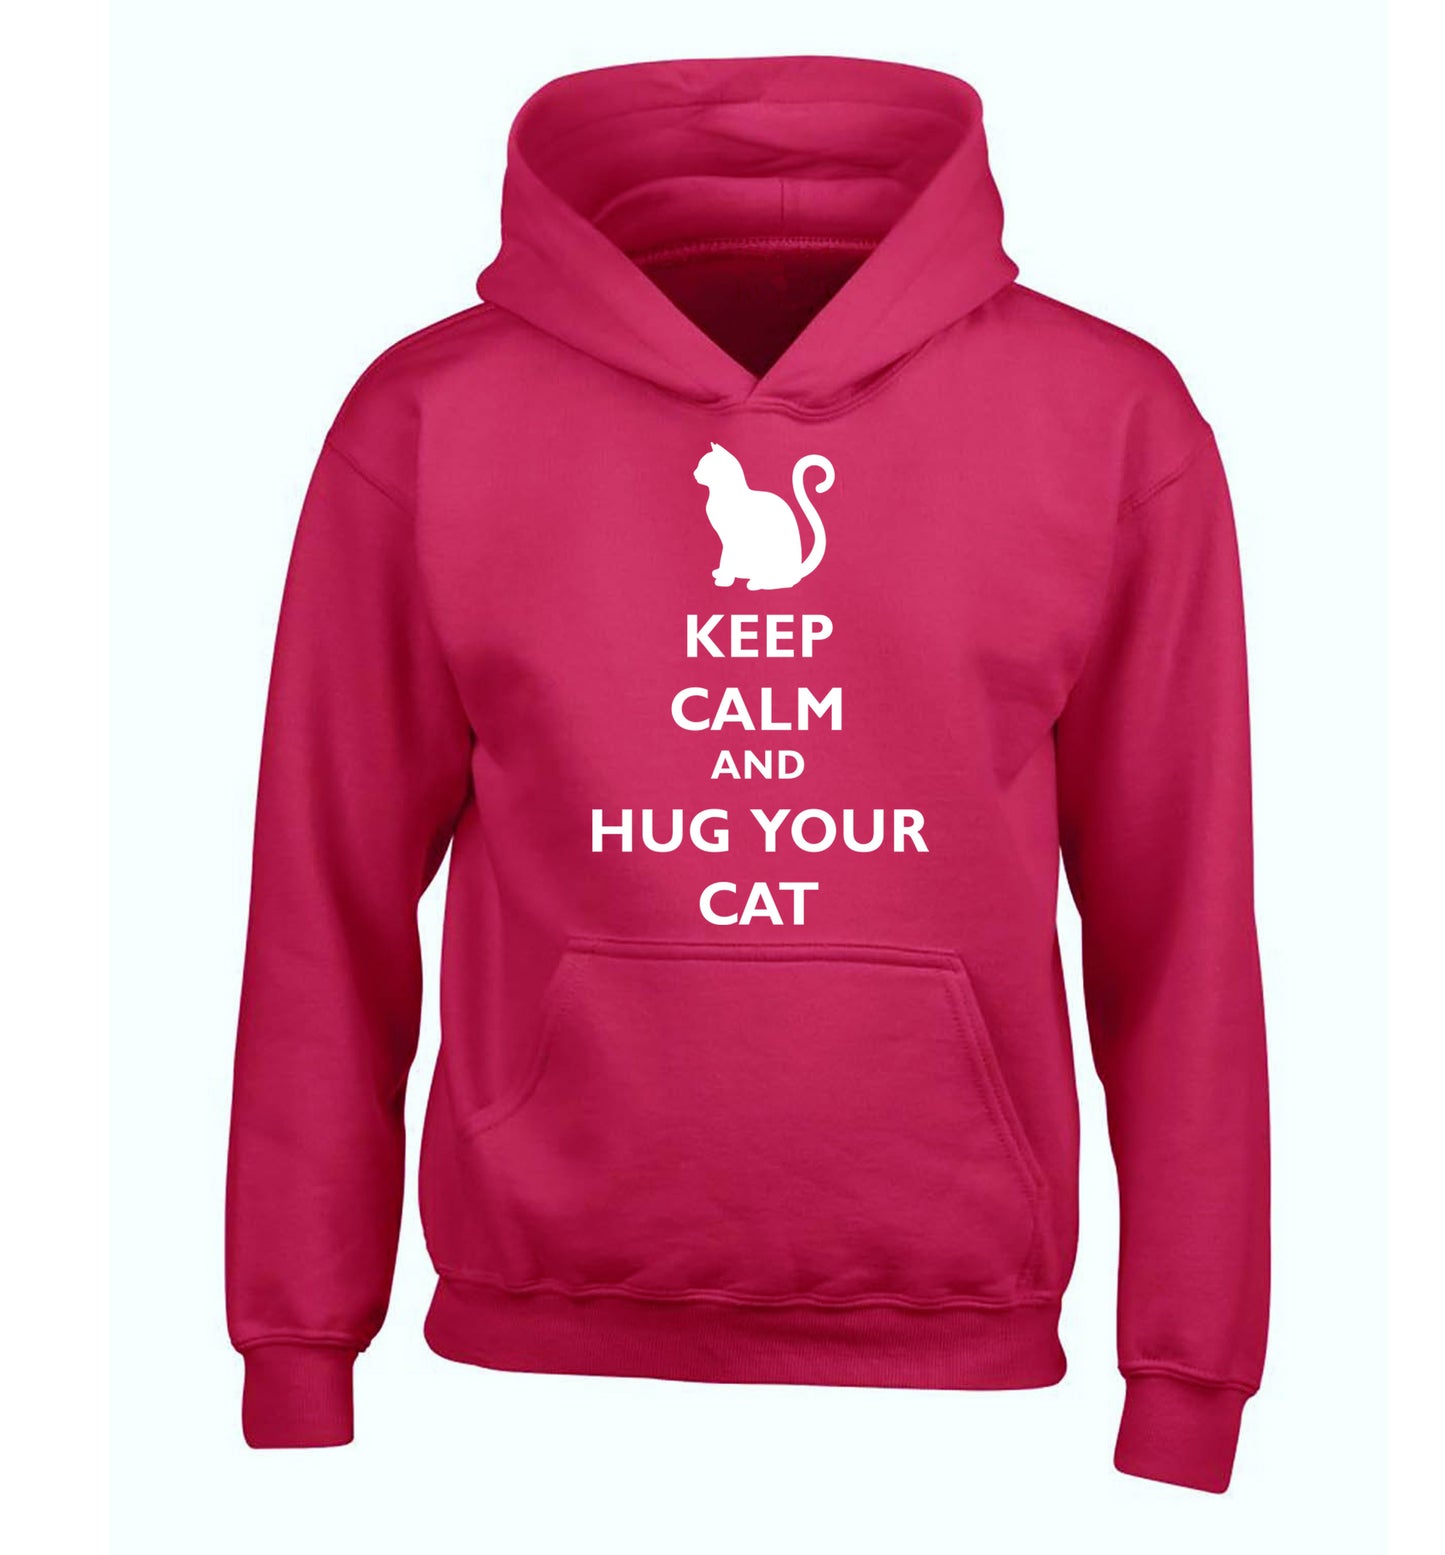 Keep calm and hug your cat children's pink hoodie 12-13 Years